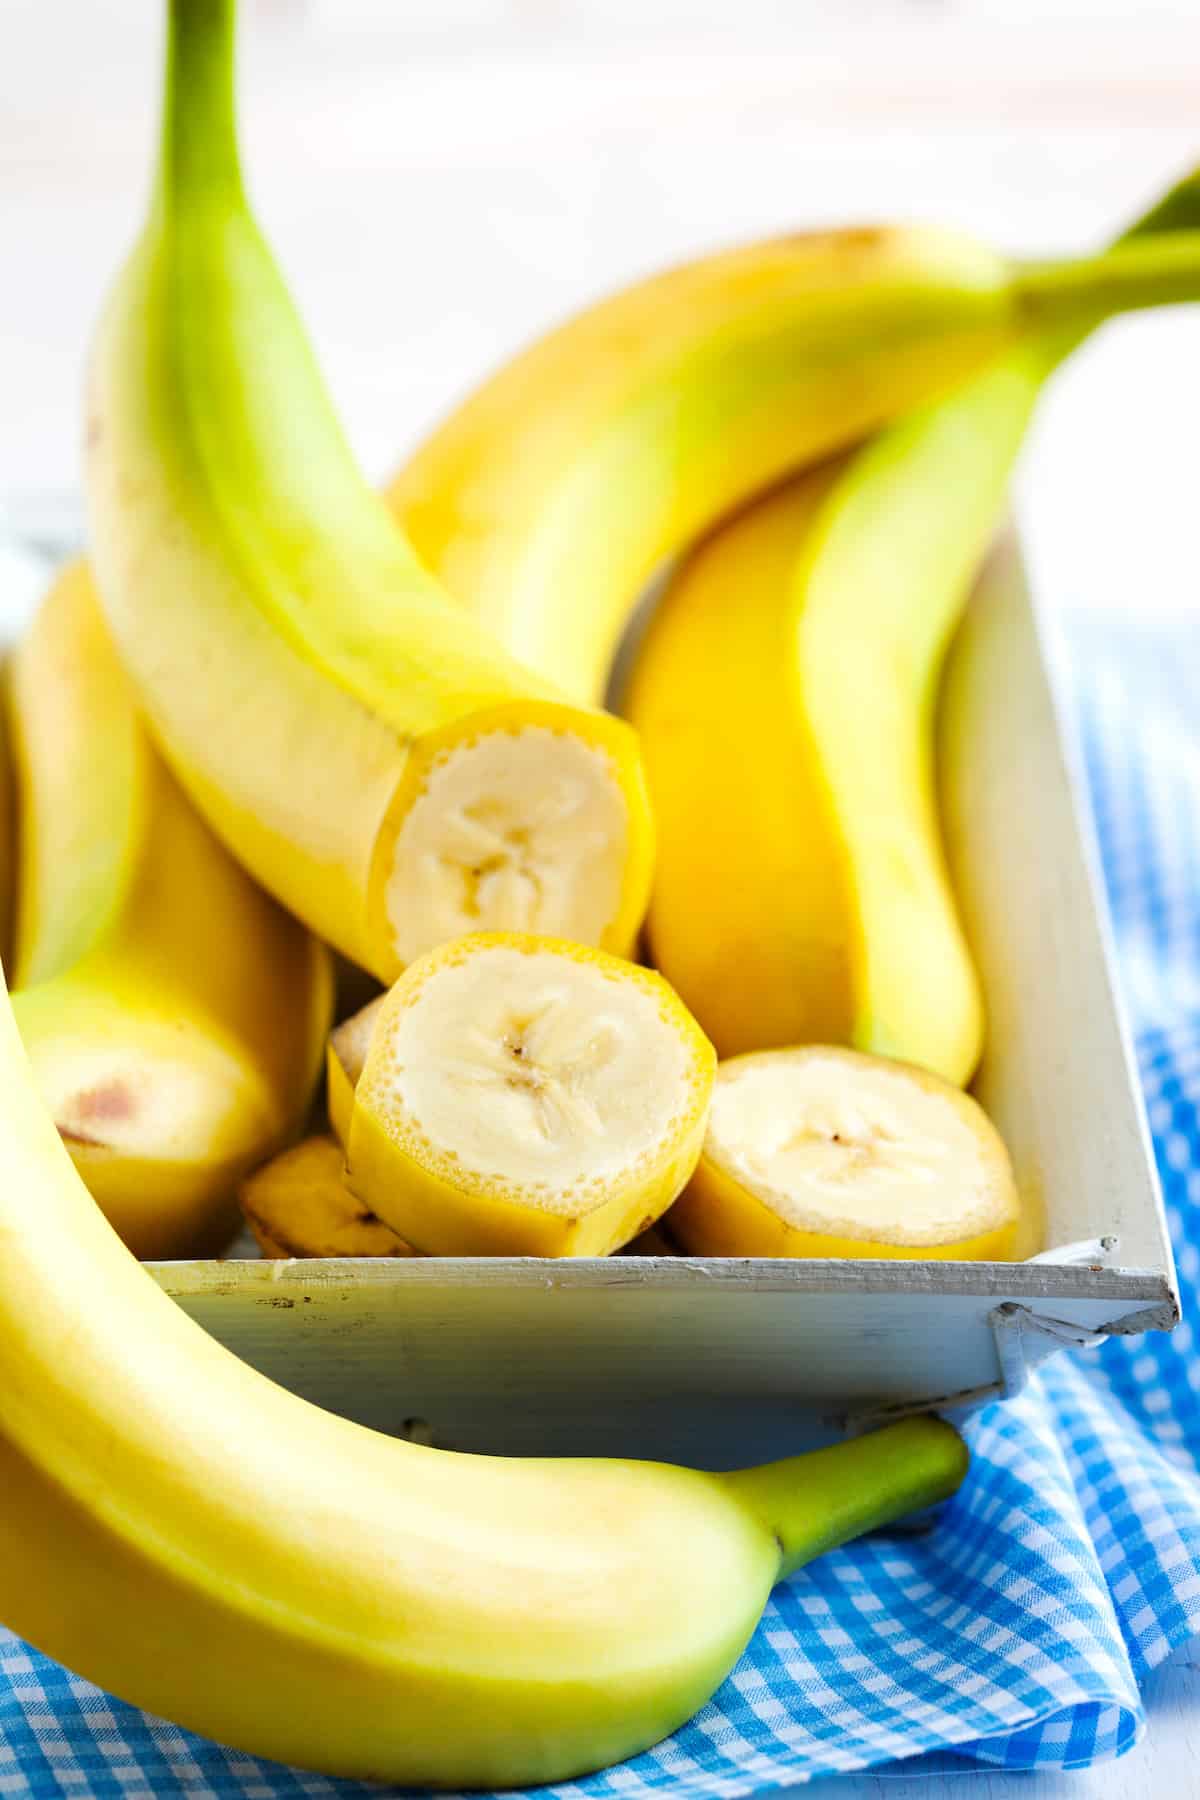 Bananas in a dish, with one cut into slices